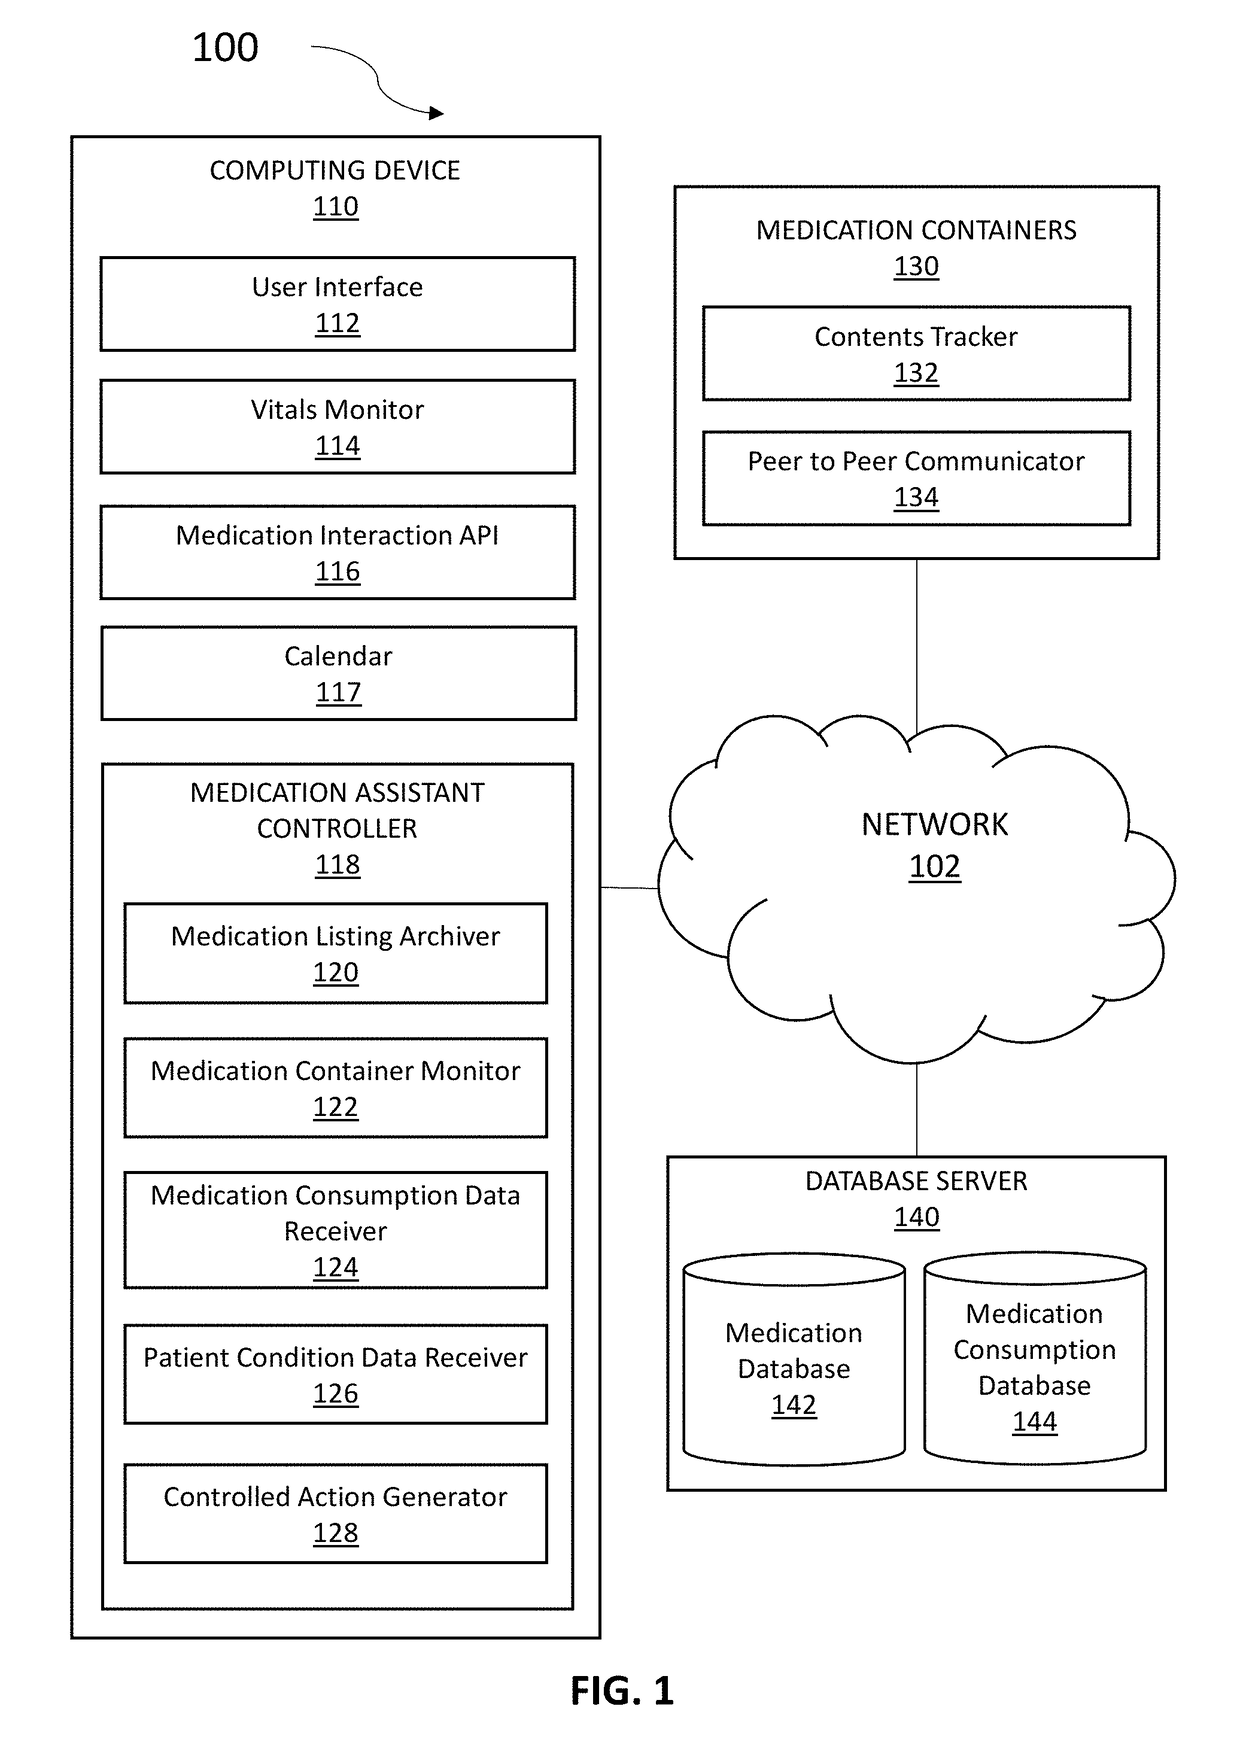 Cognitive medication containers providing targeted medication assistance